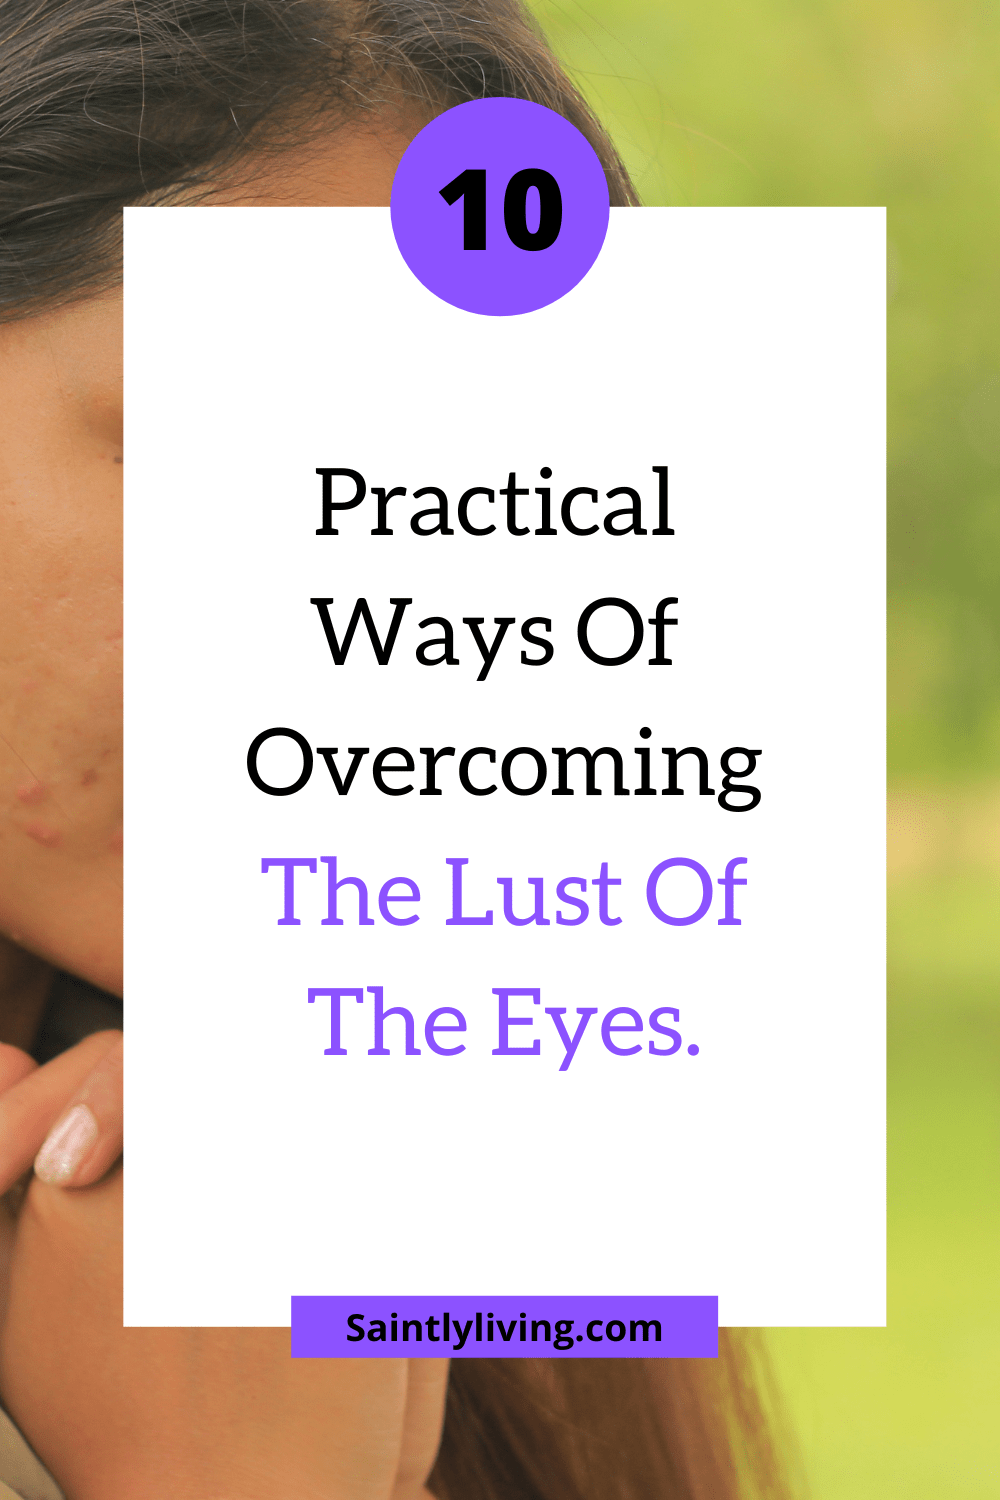 ways-of-overcoming-the-lust-of-the-eyes